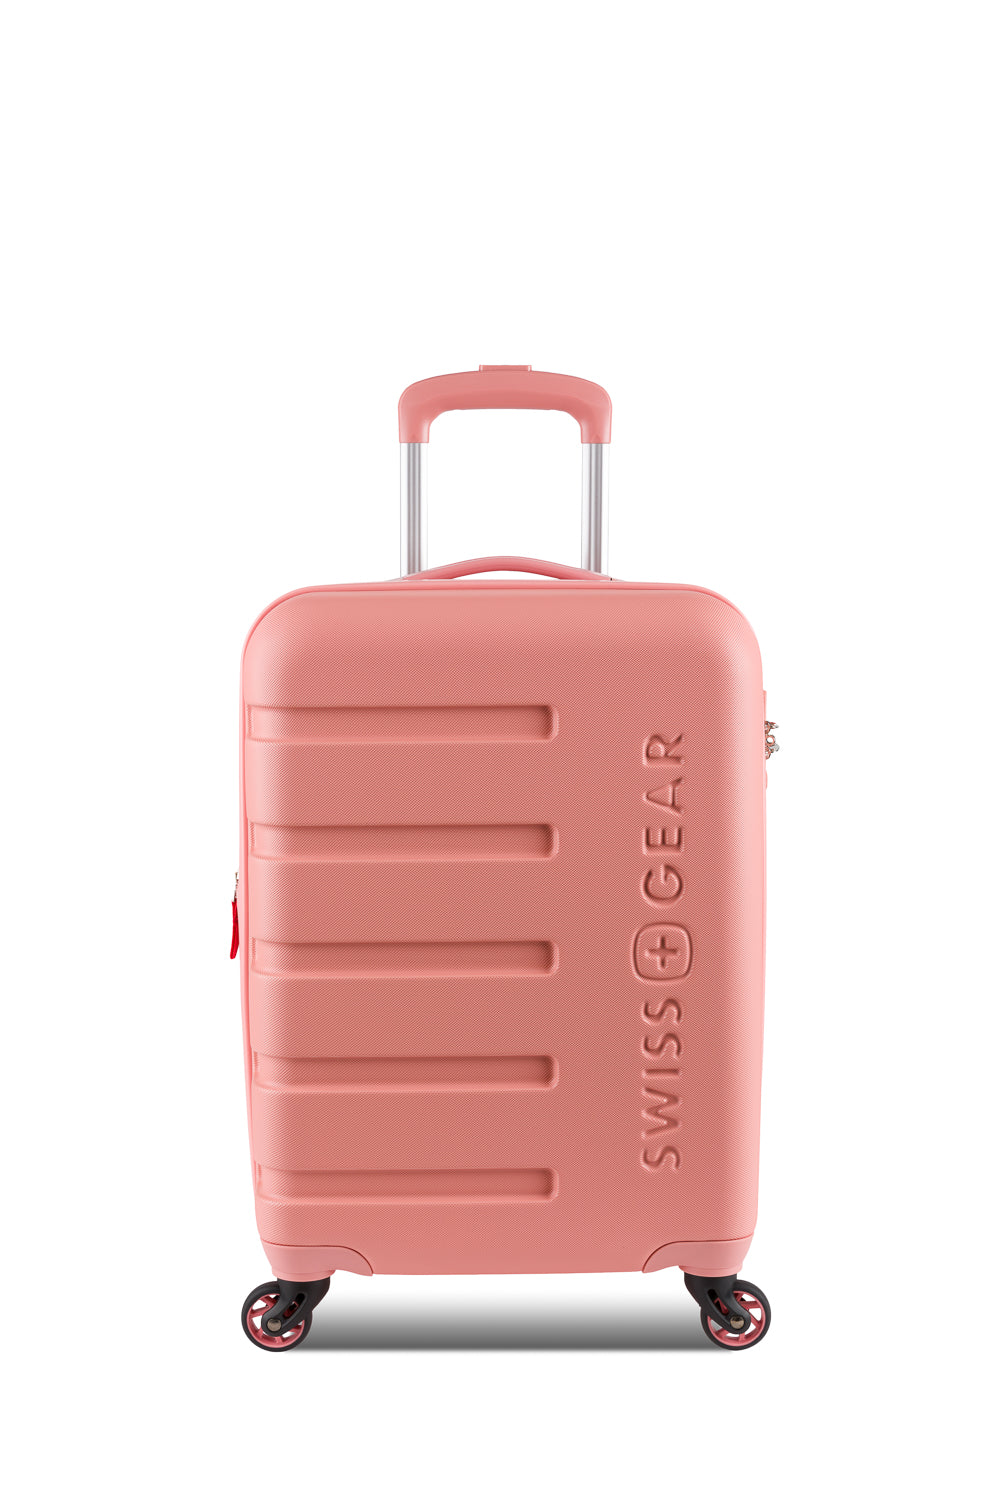 SwissGear 7366 18” Expandable Carry On Hardside Spinner Suitcase